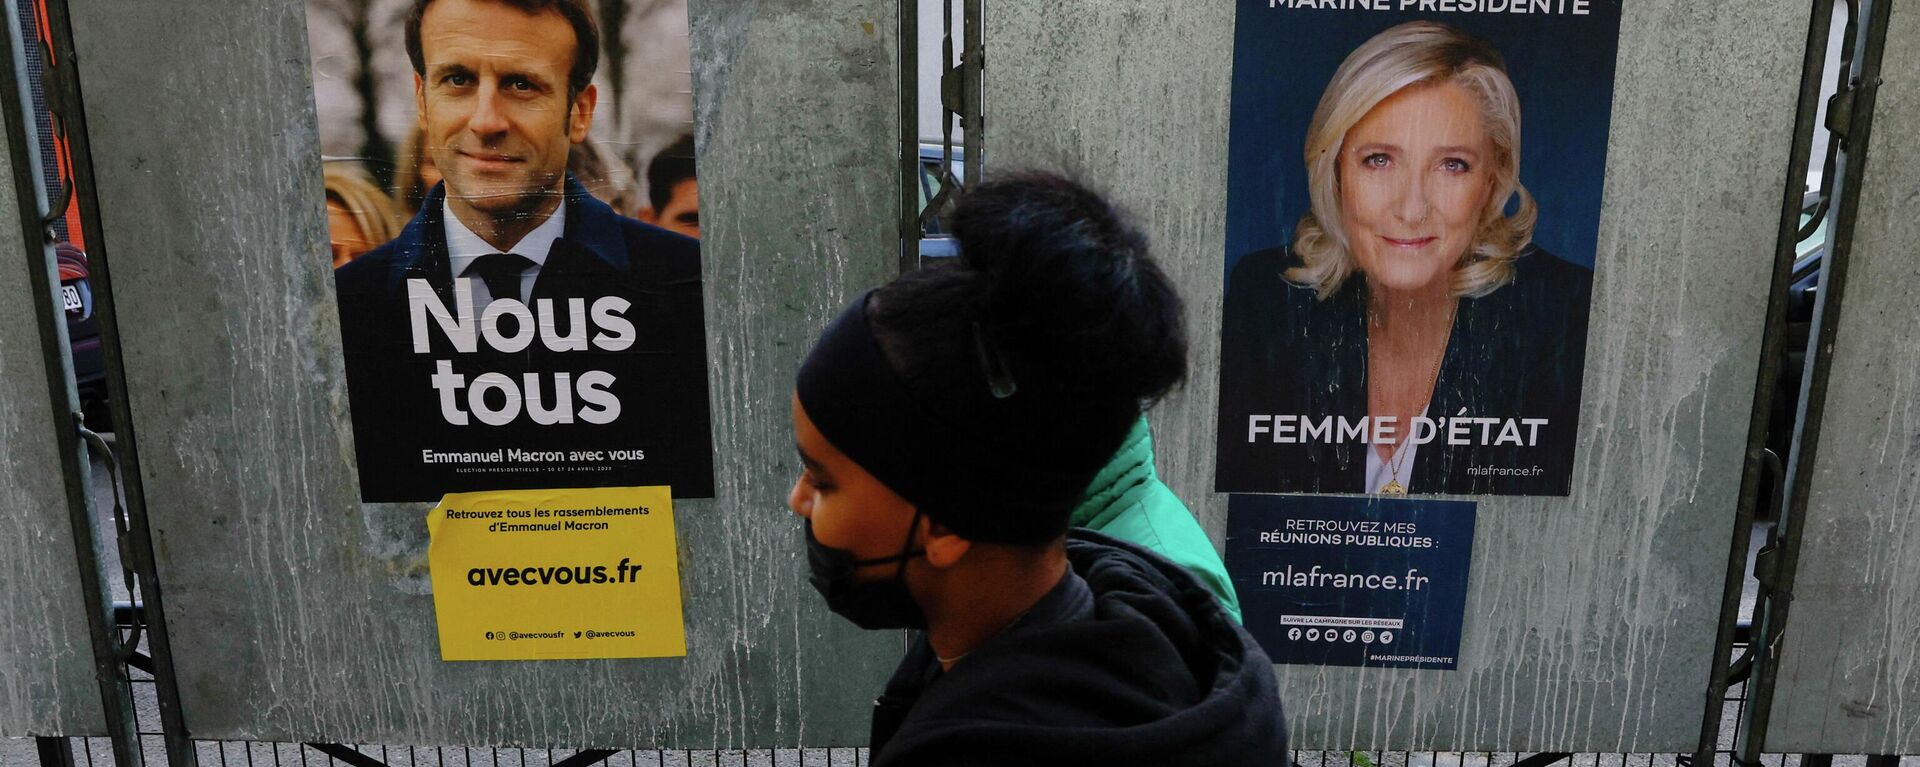 People walk past official campaign posters of French presidential election candidates Marine le Pen, leader of French right-wing National Rally (Rassemblement National) party, and French President Emmanuel Macron, candidate for his re-election, displayed on bulletin boards in Paris, France,  - Sputnik International, 1920, 22.04.2022